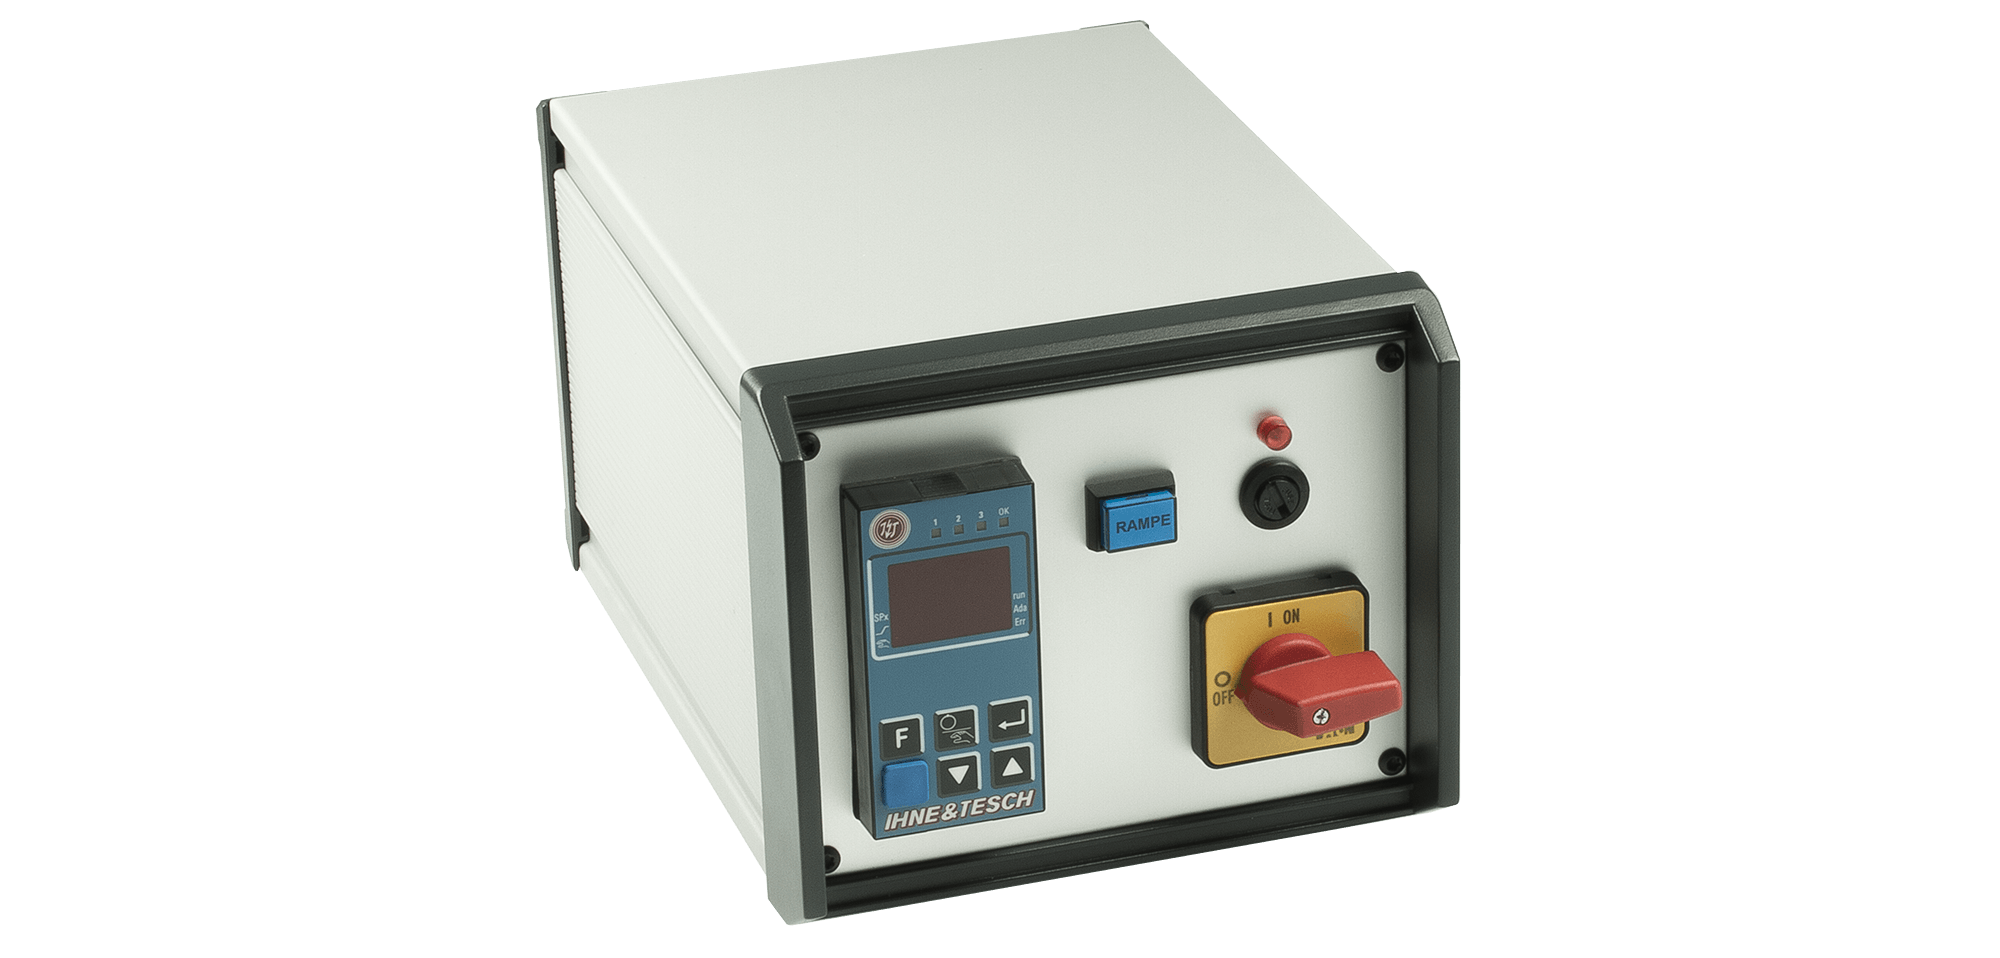 Control Unit, temperature monitoring, hot runner system, plasics processing, packaging industry, food industry, heat load monitoring, temperature monitoring, start-up circuitiry ,alarm output,  Low Cost variant